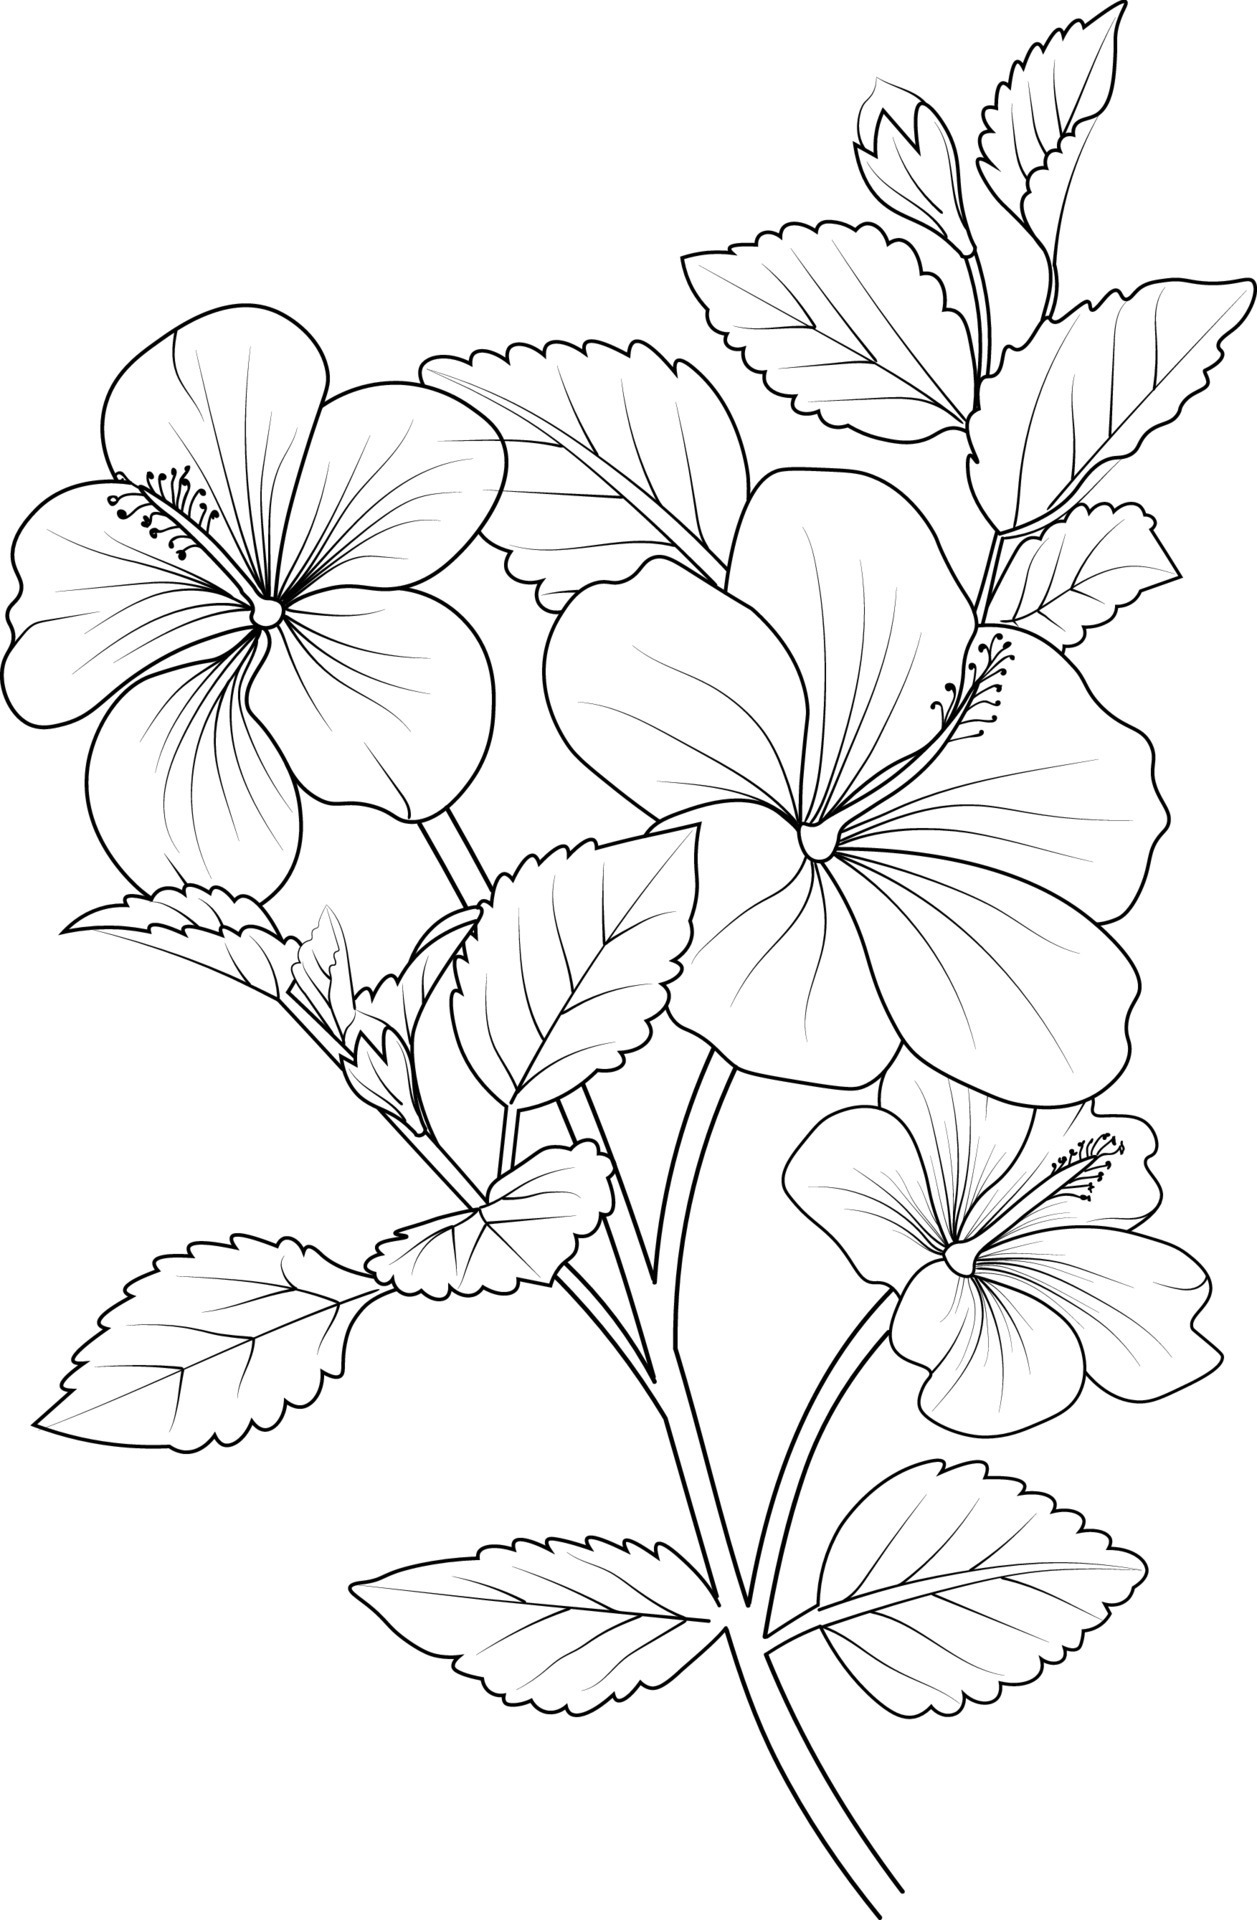 Hibiscus Drawing - How To Draw A Hibiscus Step By Step-saigonsouth.com.vn